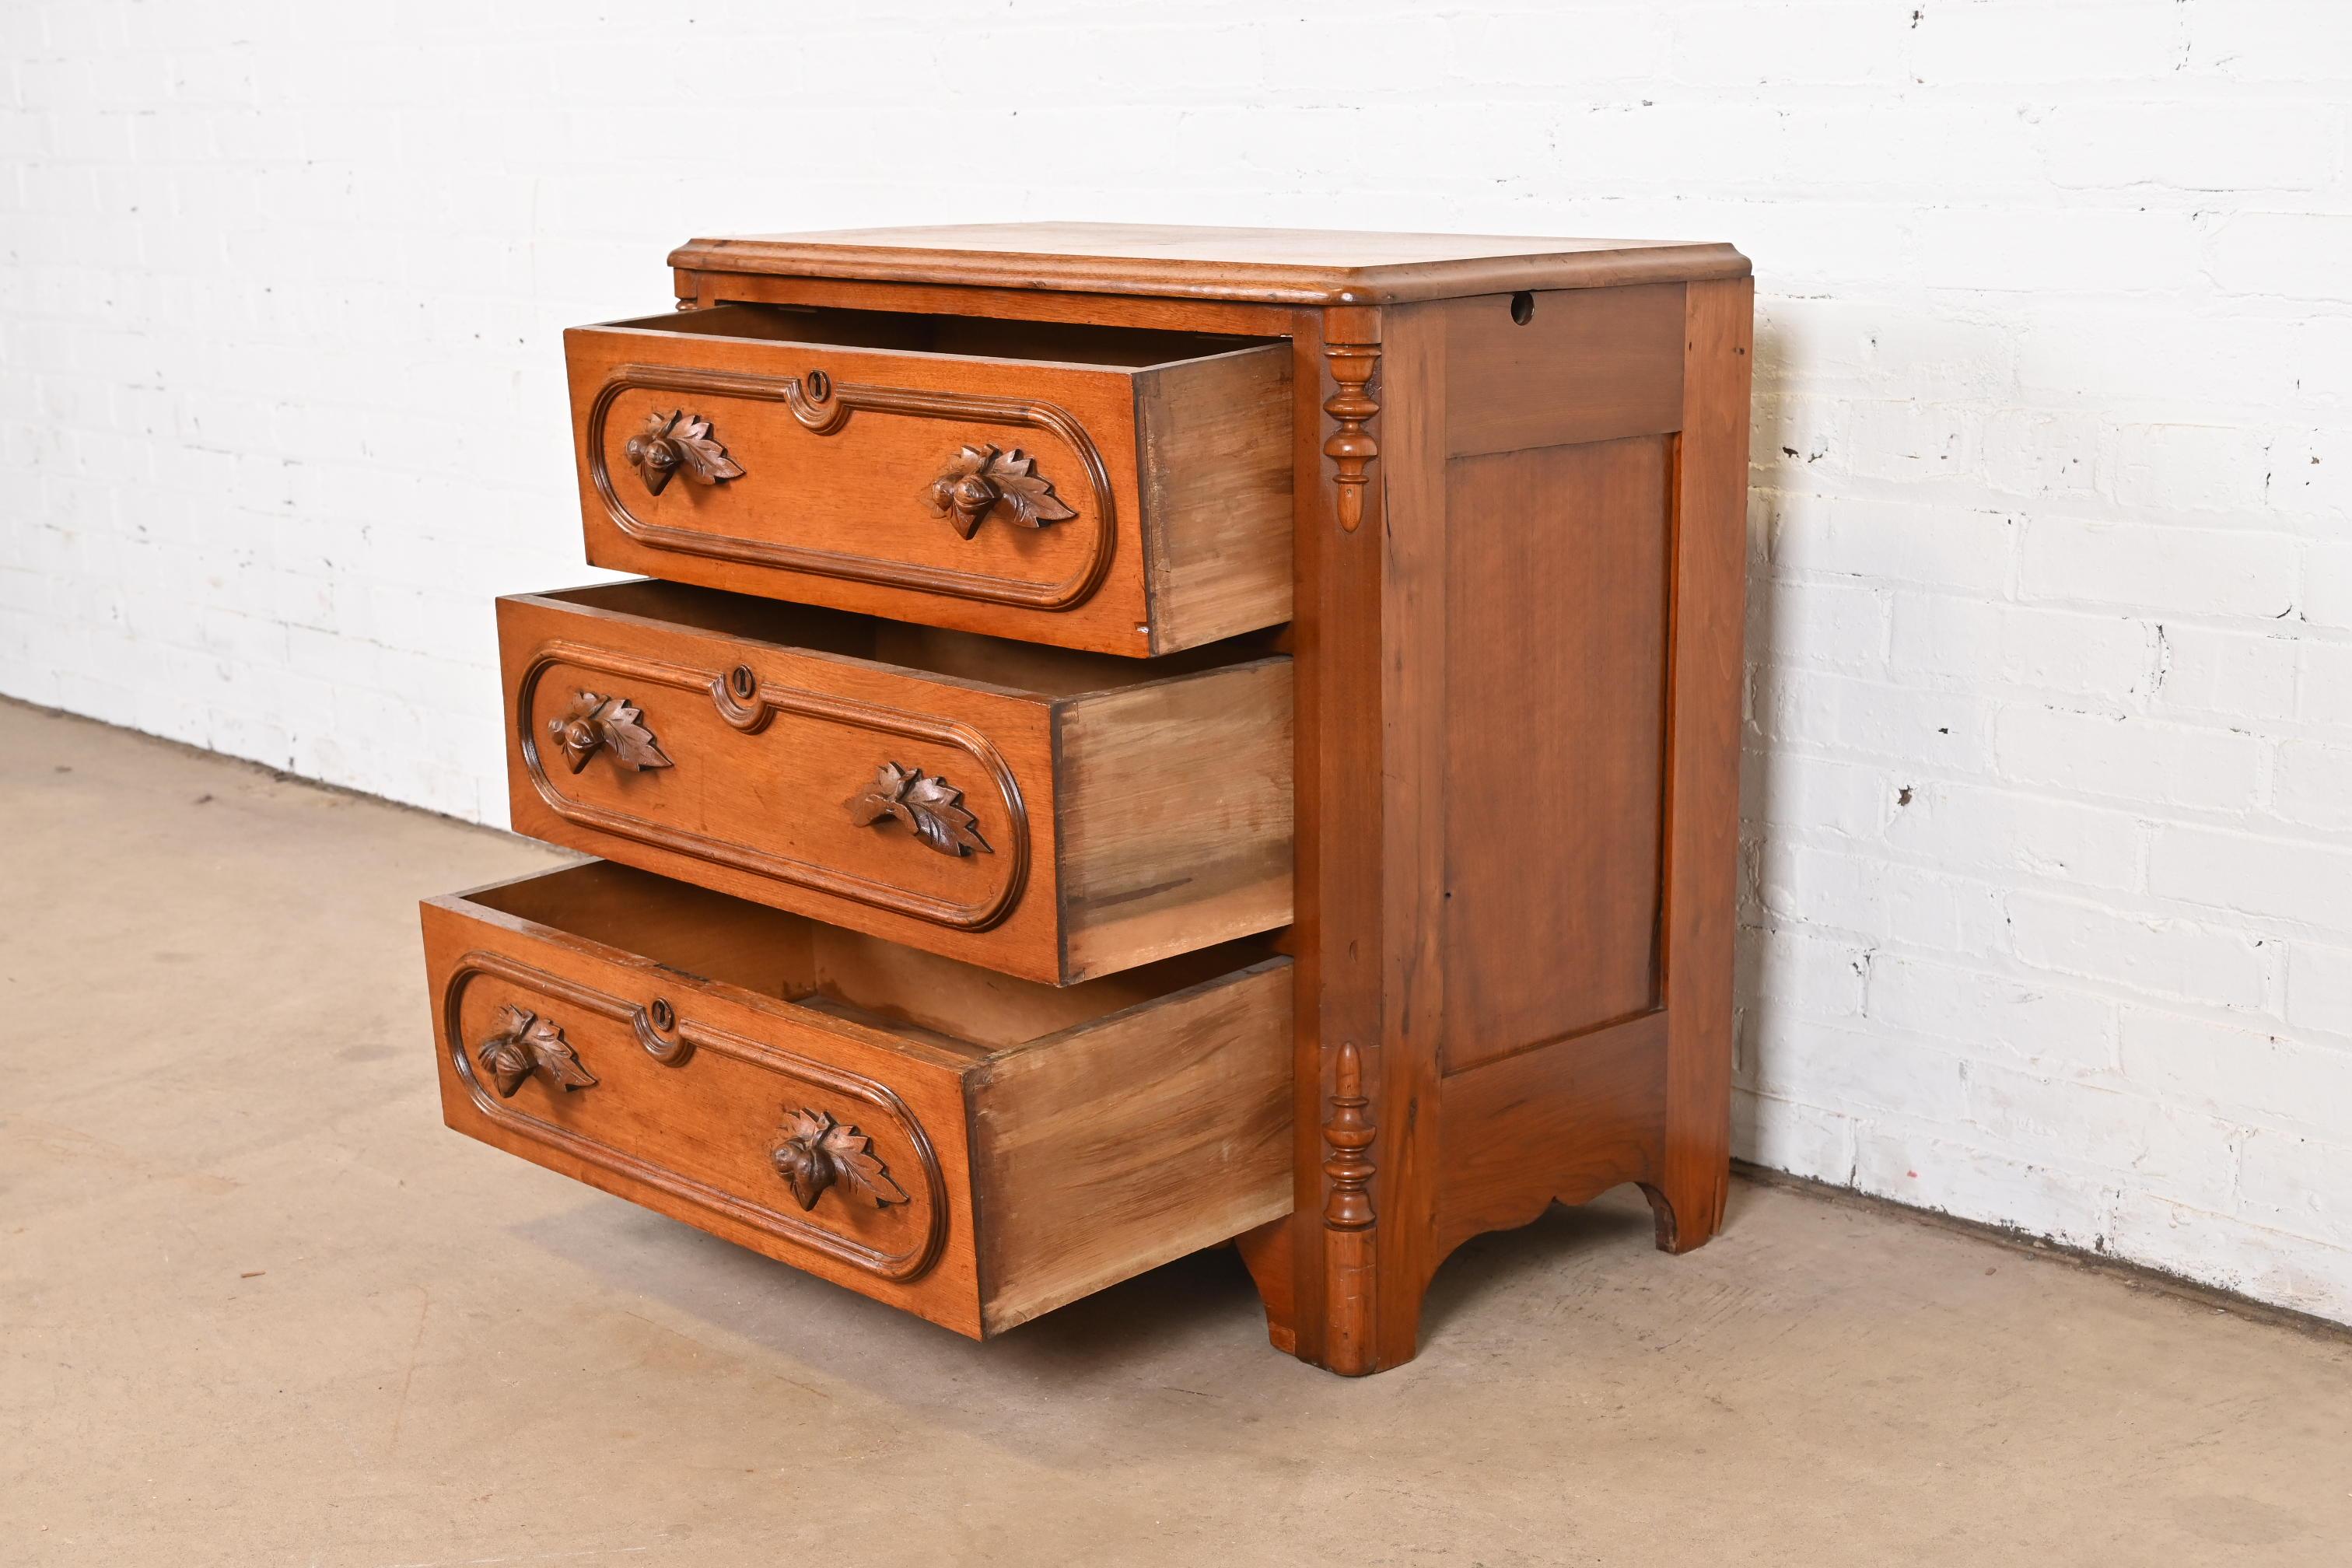 Early Widdicomb Victorian Carved Walnut Chest of Drawers, Circa 1870 In Good Condition For Sale In South Bend, IN